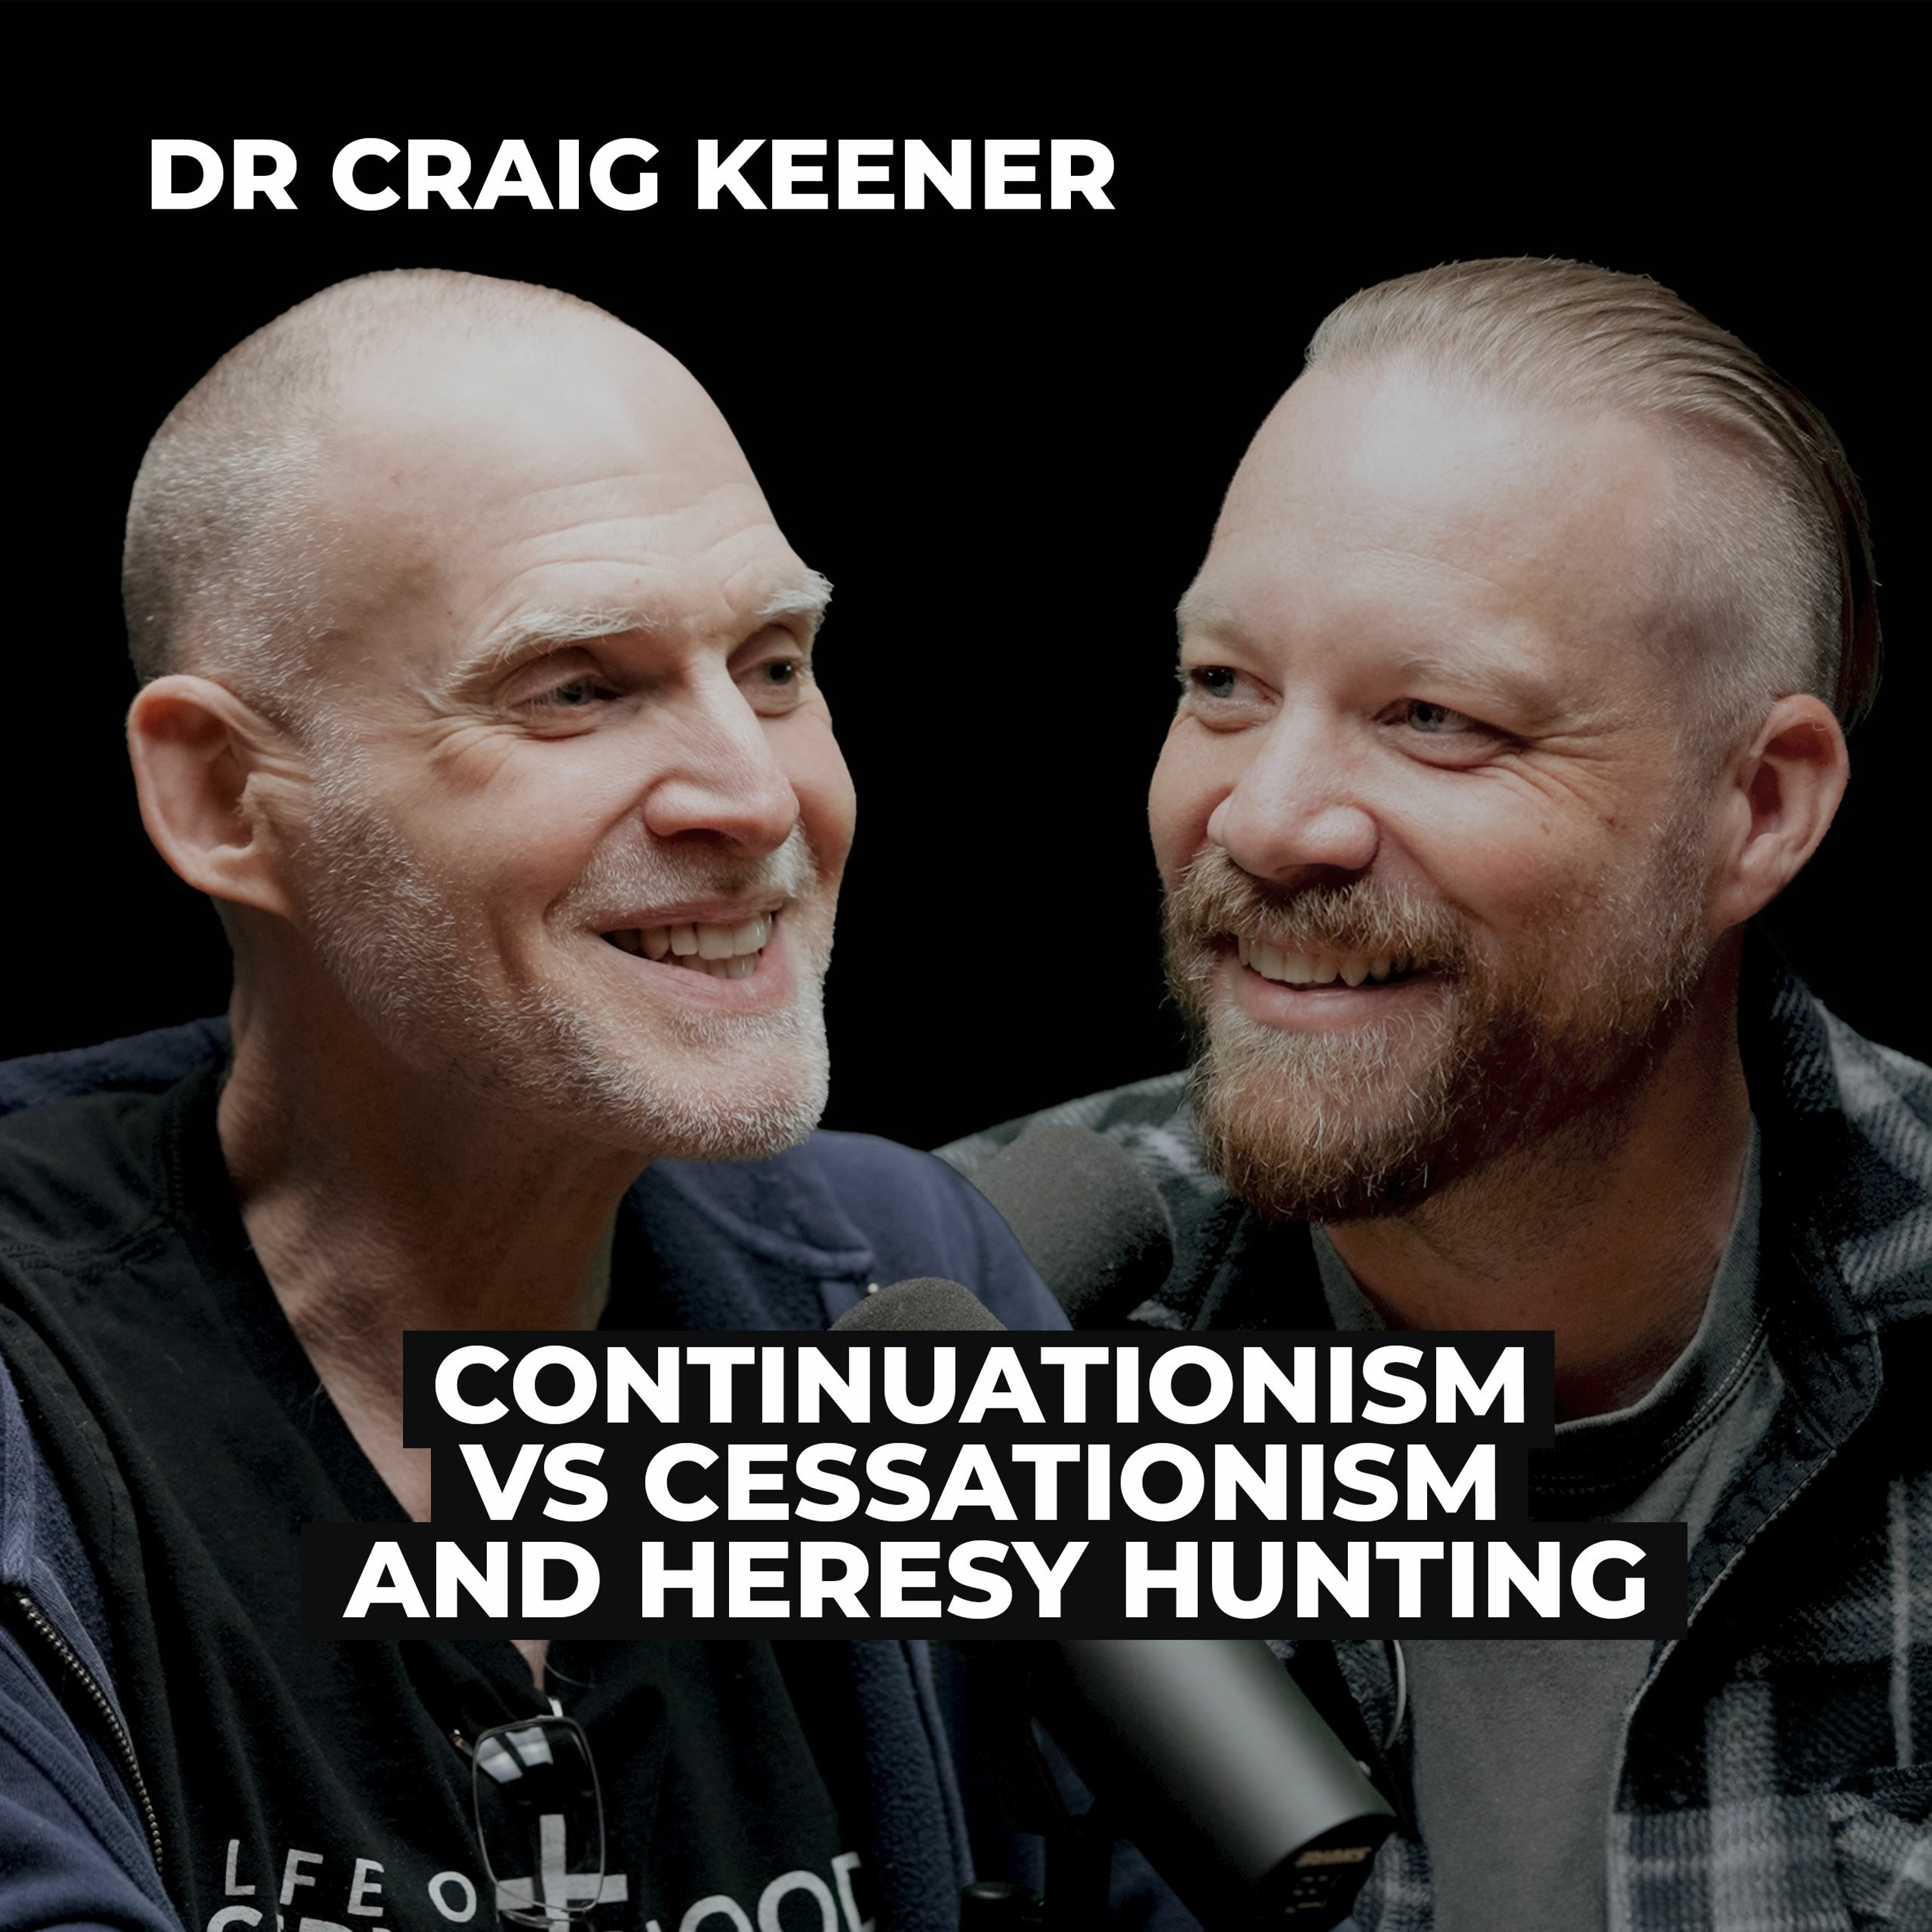 Dr. Craig Keener: Continuationism vs Cessationism, and Heresy Hunting